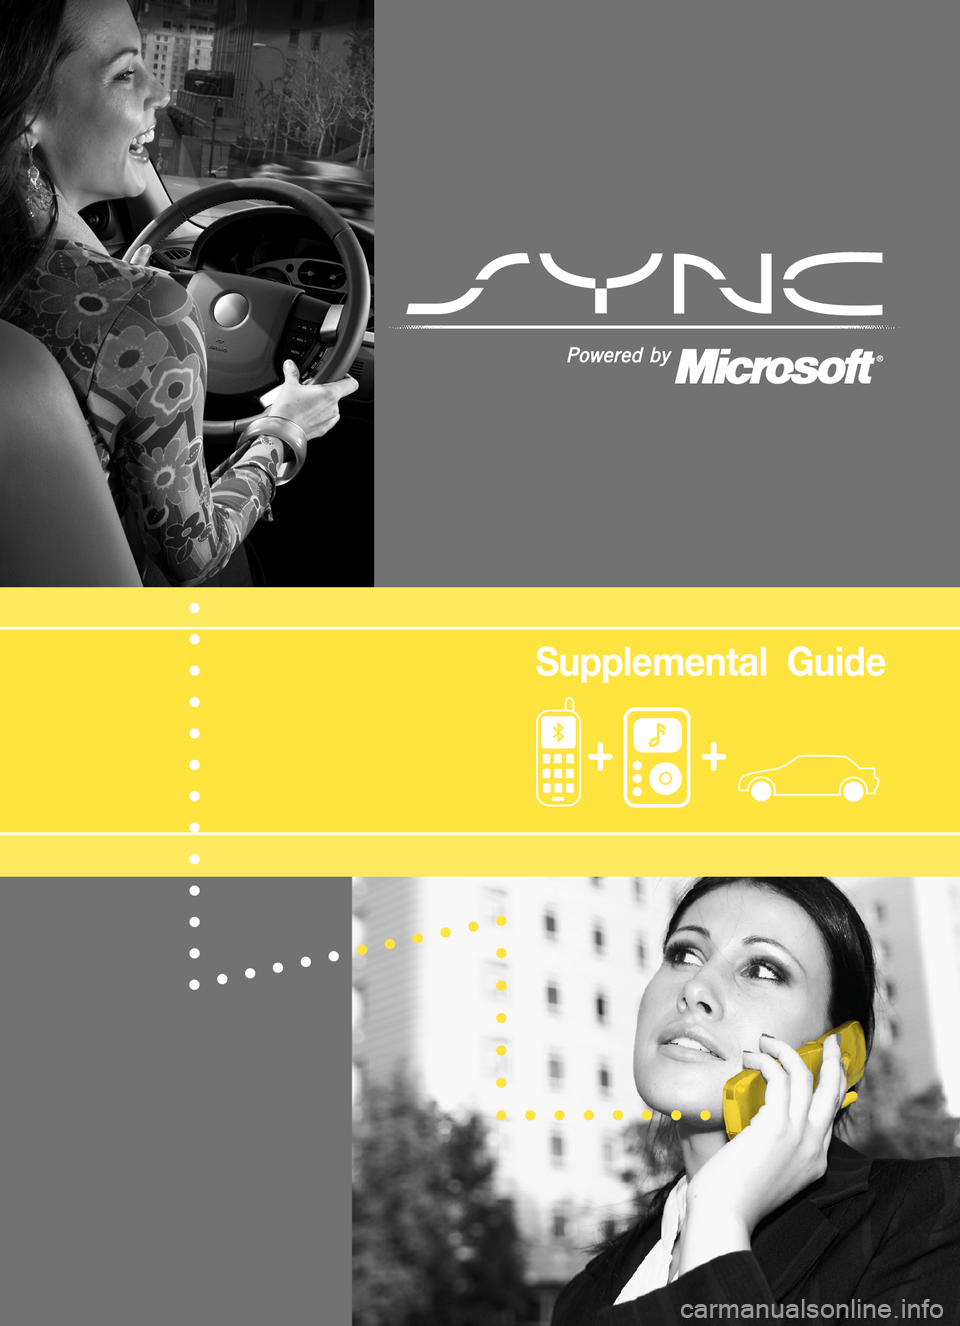 Mercury Mountaineer 2008  SYNC Supplement  www.SyncMyRide.com
8L2J 19A285 AA 
Supplemental Guide  |  July 2007 

Supplemental  Guide
97071  08 SYNC_MGM Supp.indd   1
97071 08 SYNC_MGM Supp.indd  